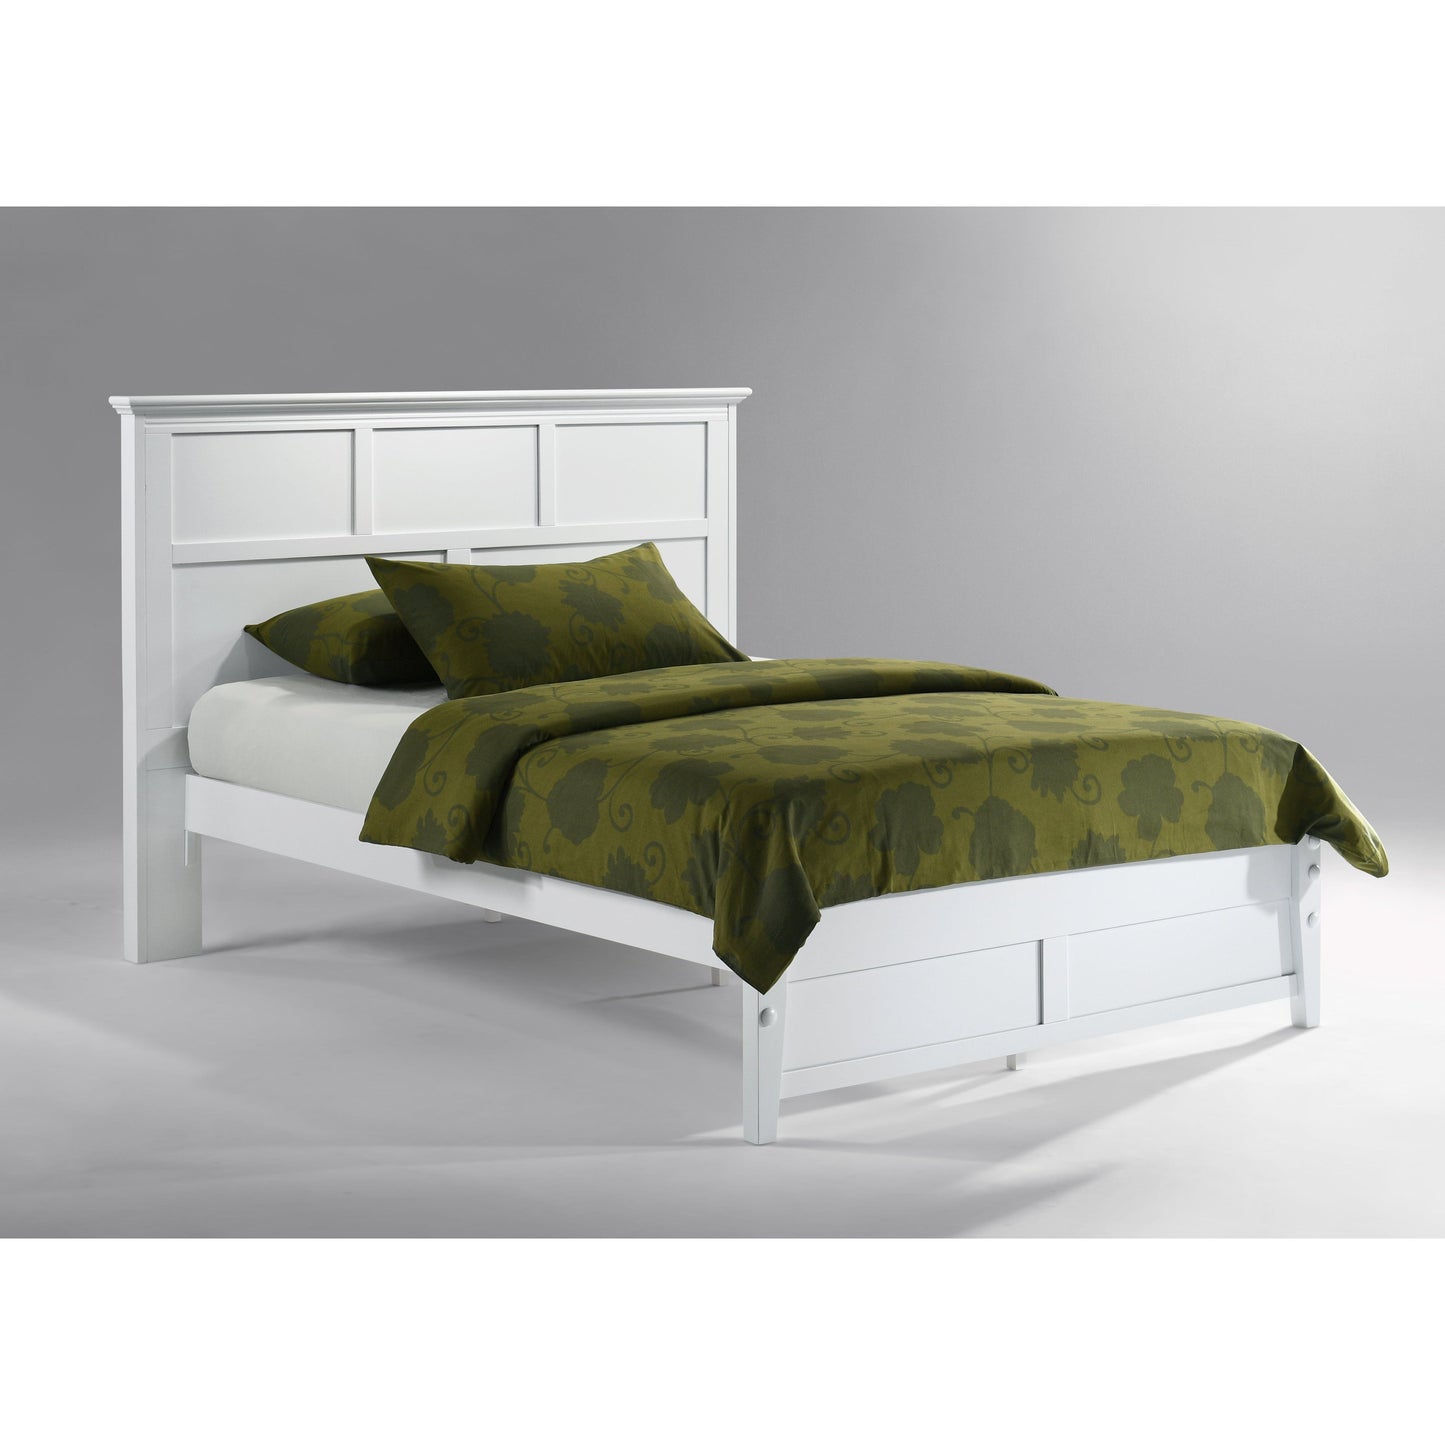 Night And Day King Tarragon Bed Frame (P Series) in cherry finish